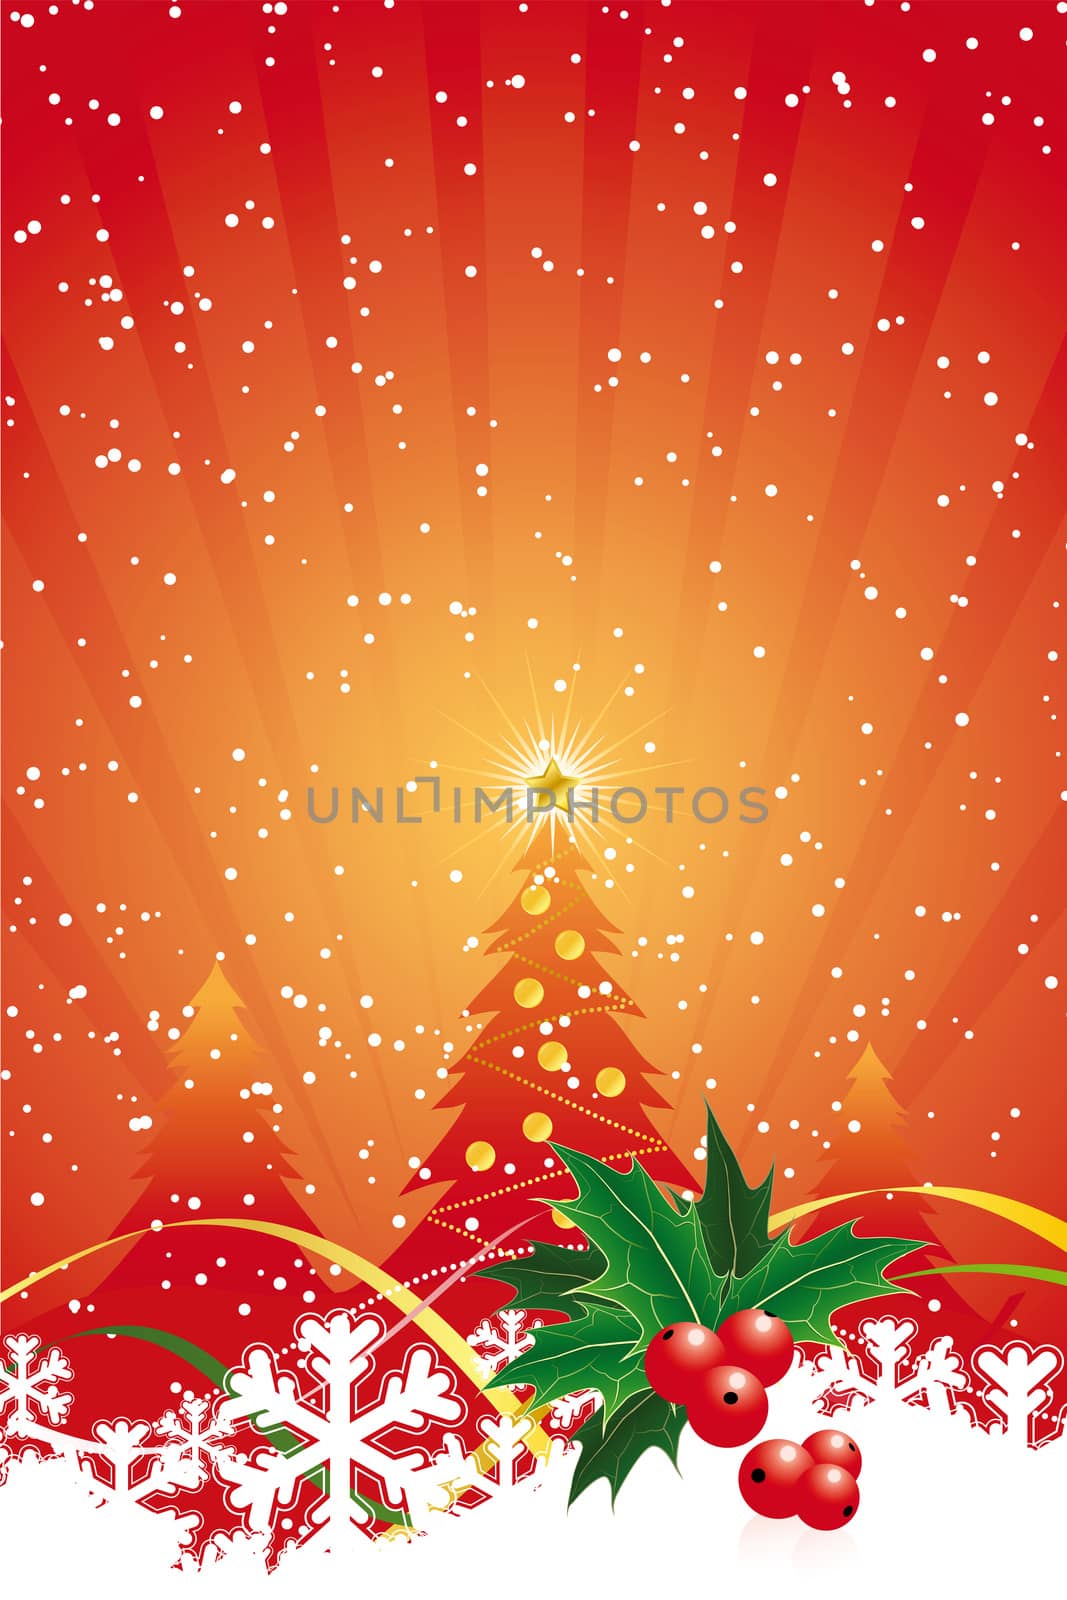 Christmas background with mistletoe and tree in red color